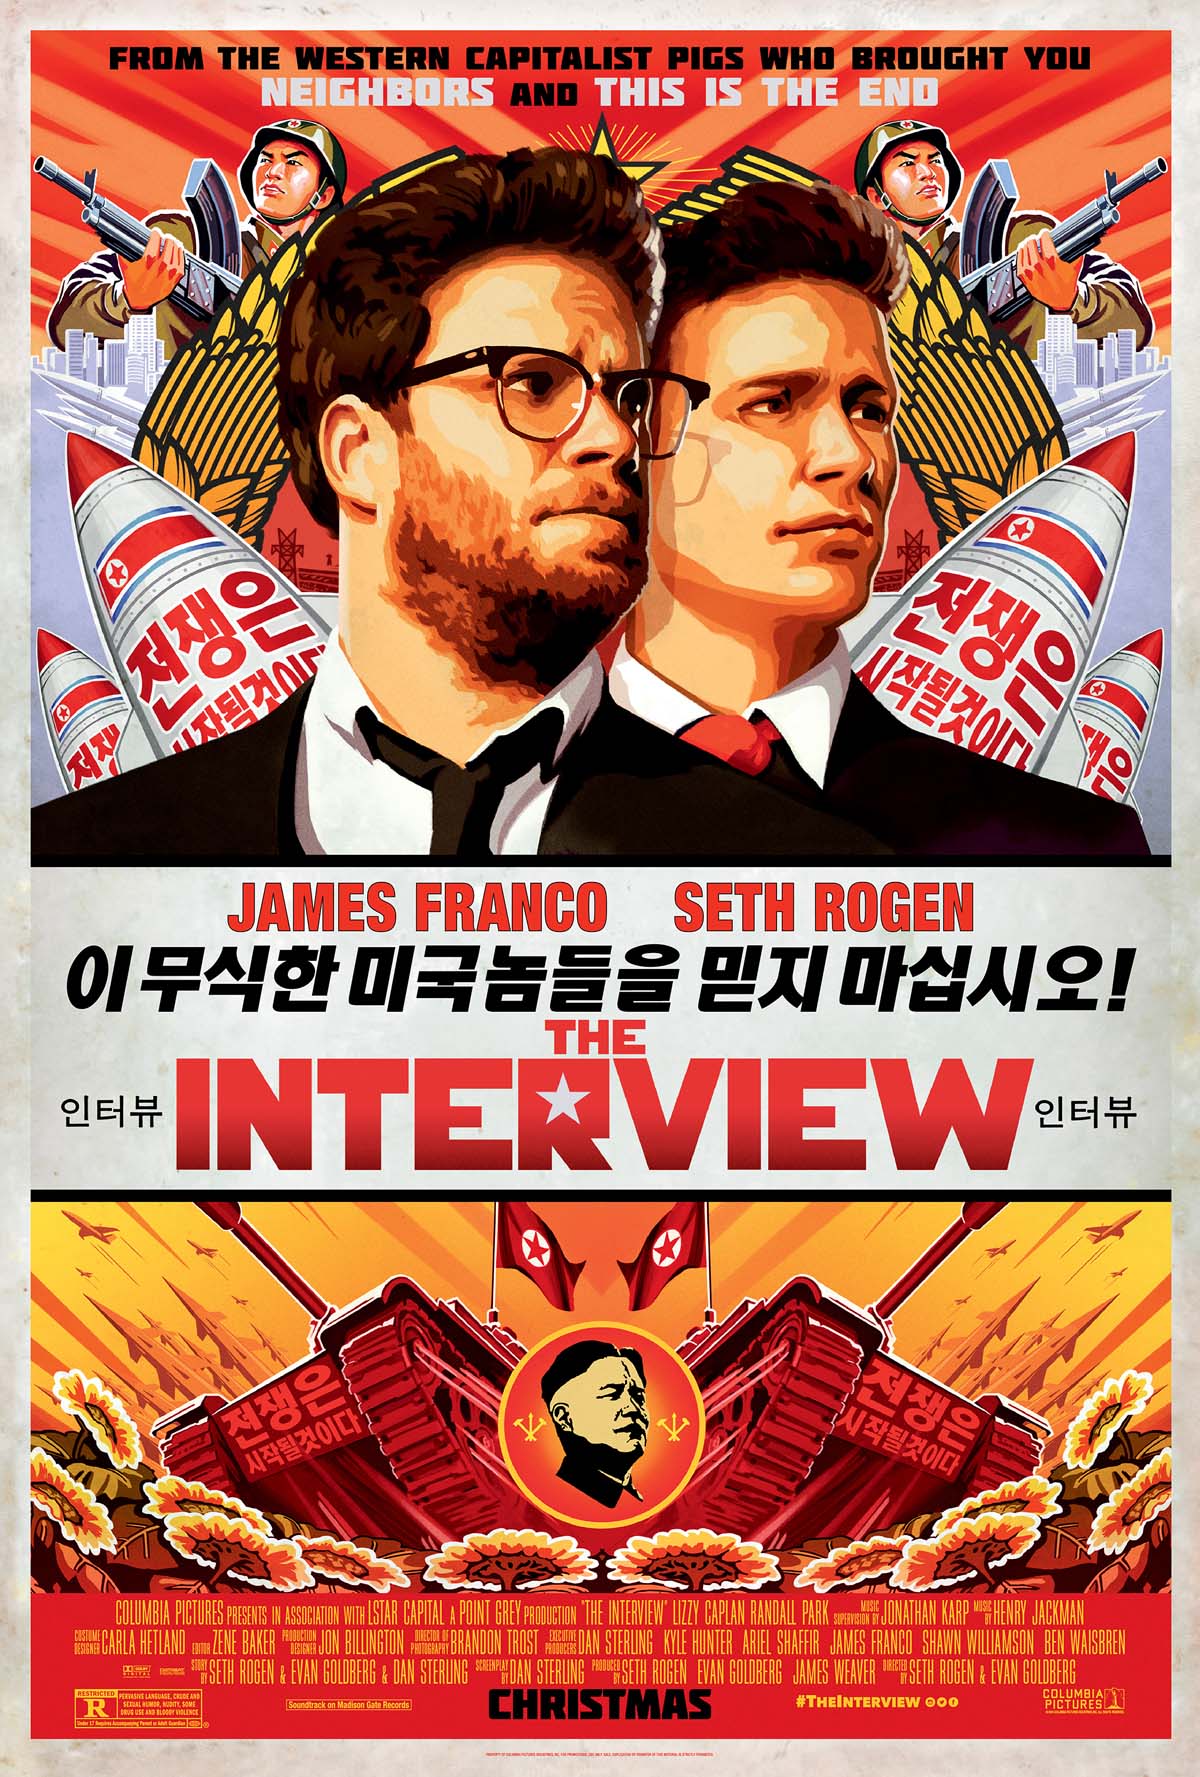 Columbia Pictures presents: The Interview Thursday | December 18 8 pm   Dave Skylark (James